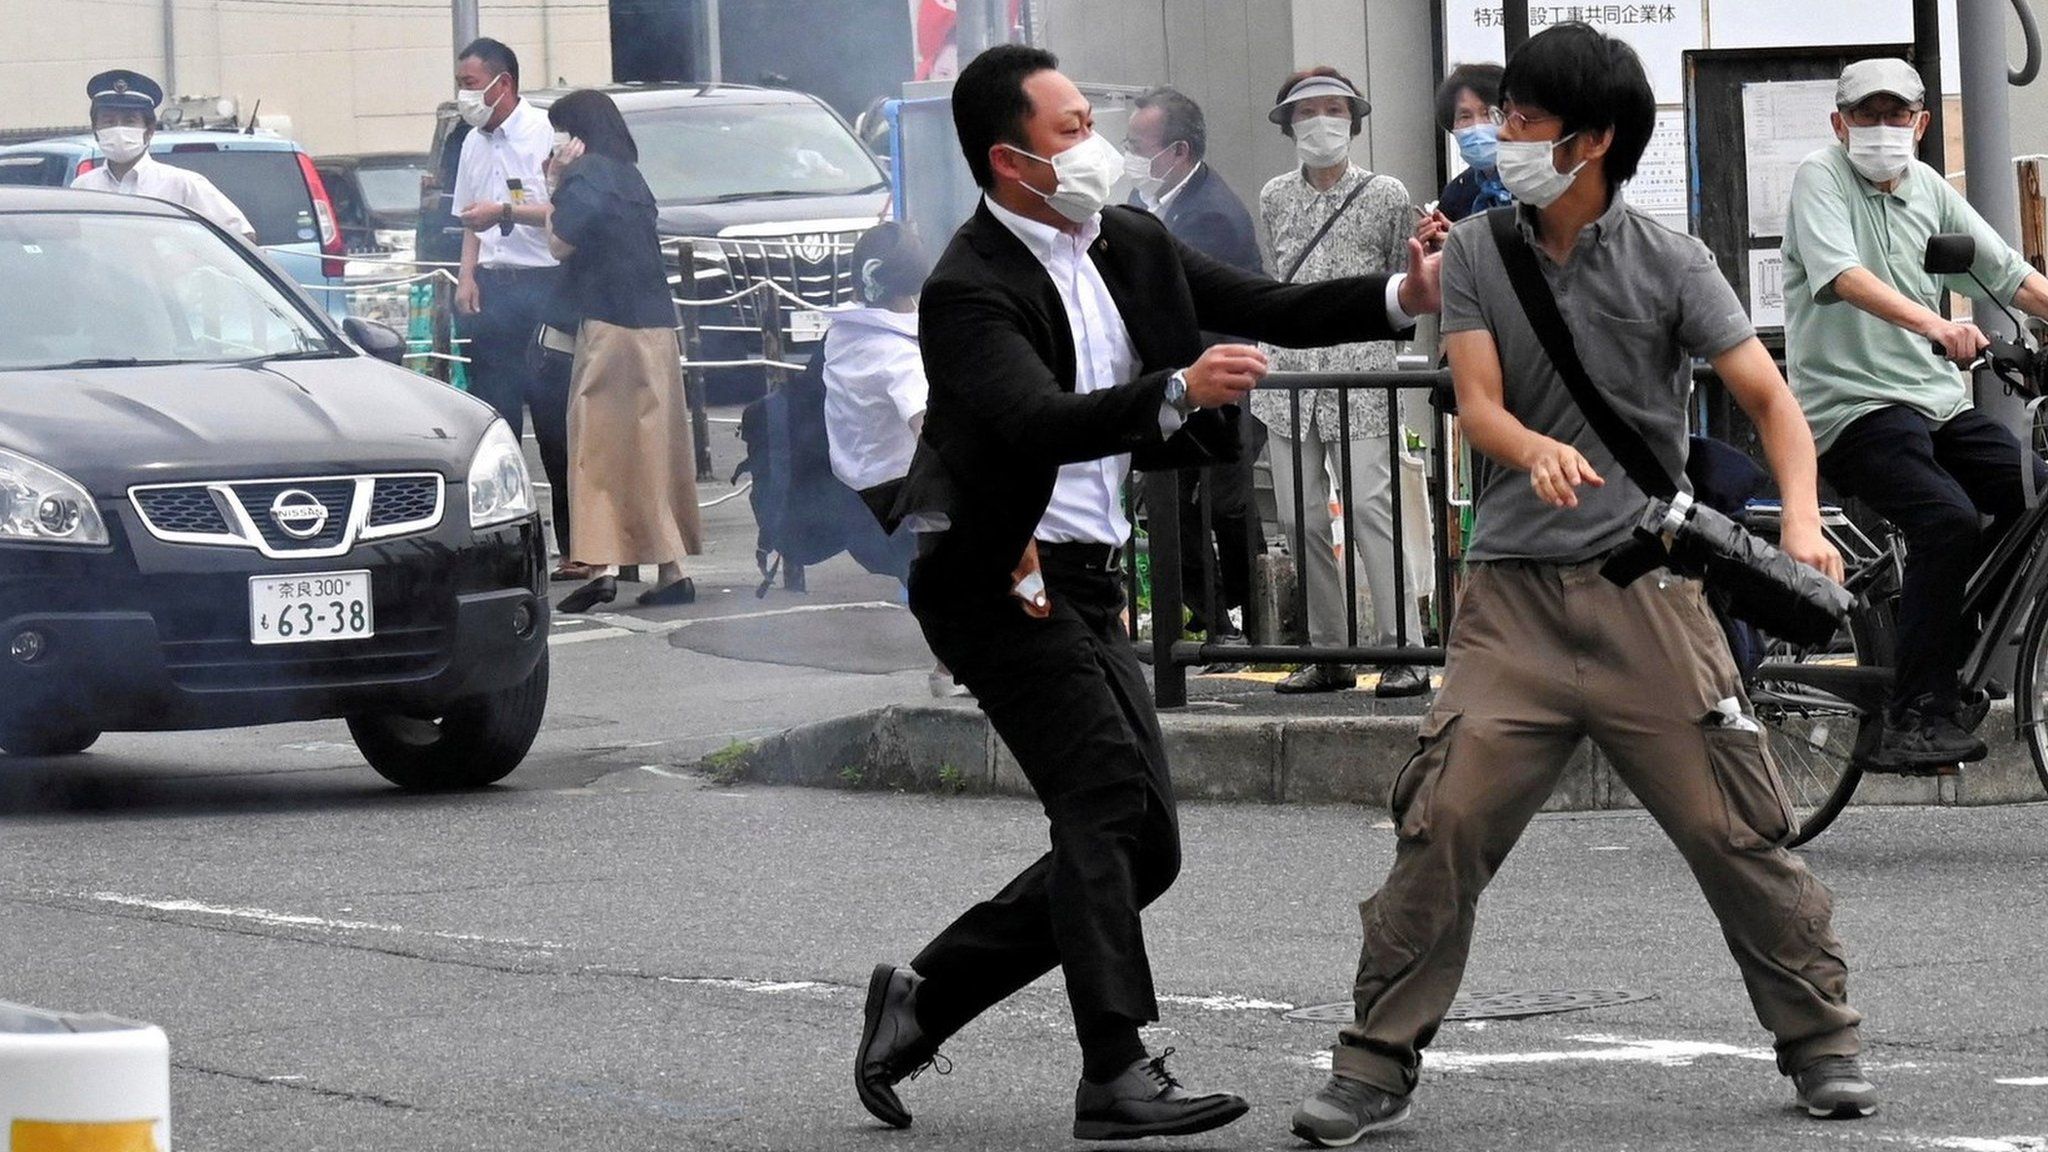 A police officer detains a man, believed to have shot former Japanese Prime Minister Shinzo Abe, in Nara, western Japan July 8, 2022